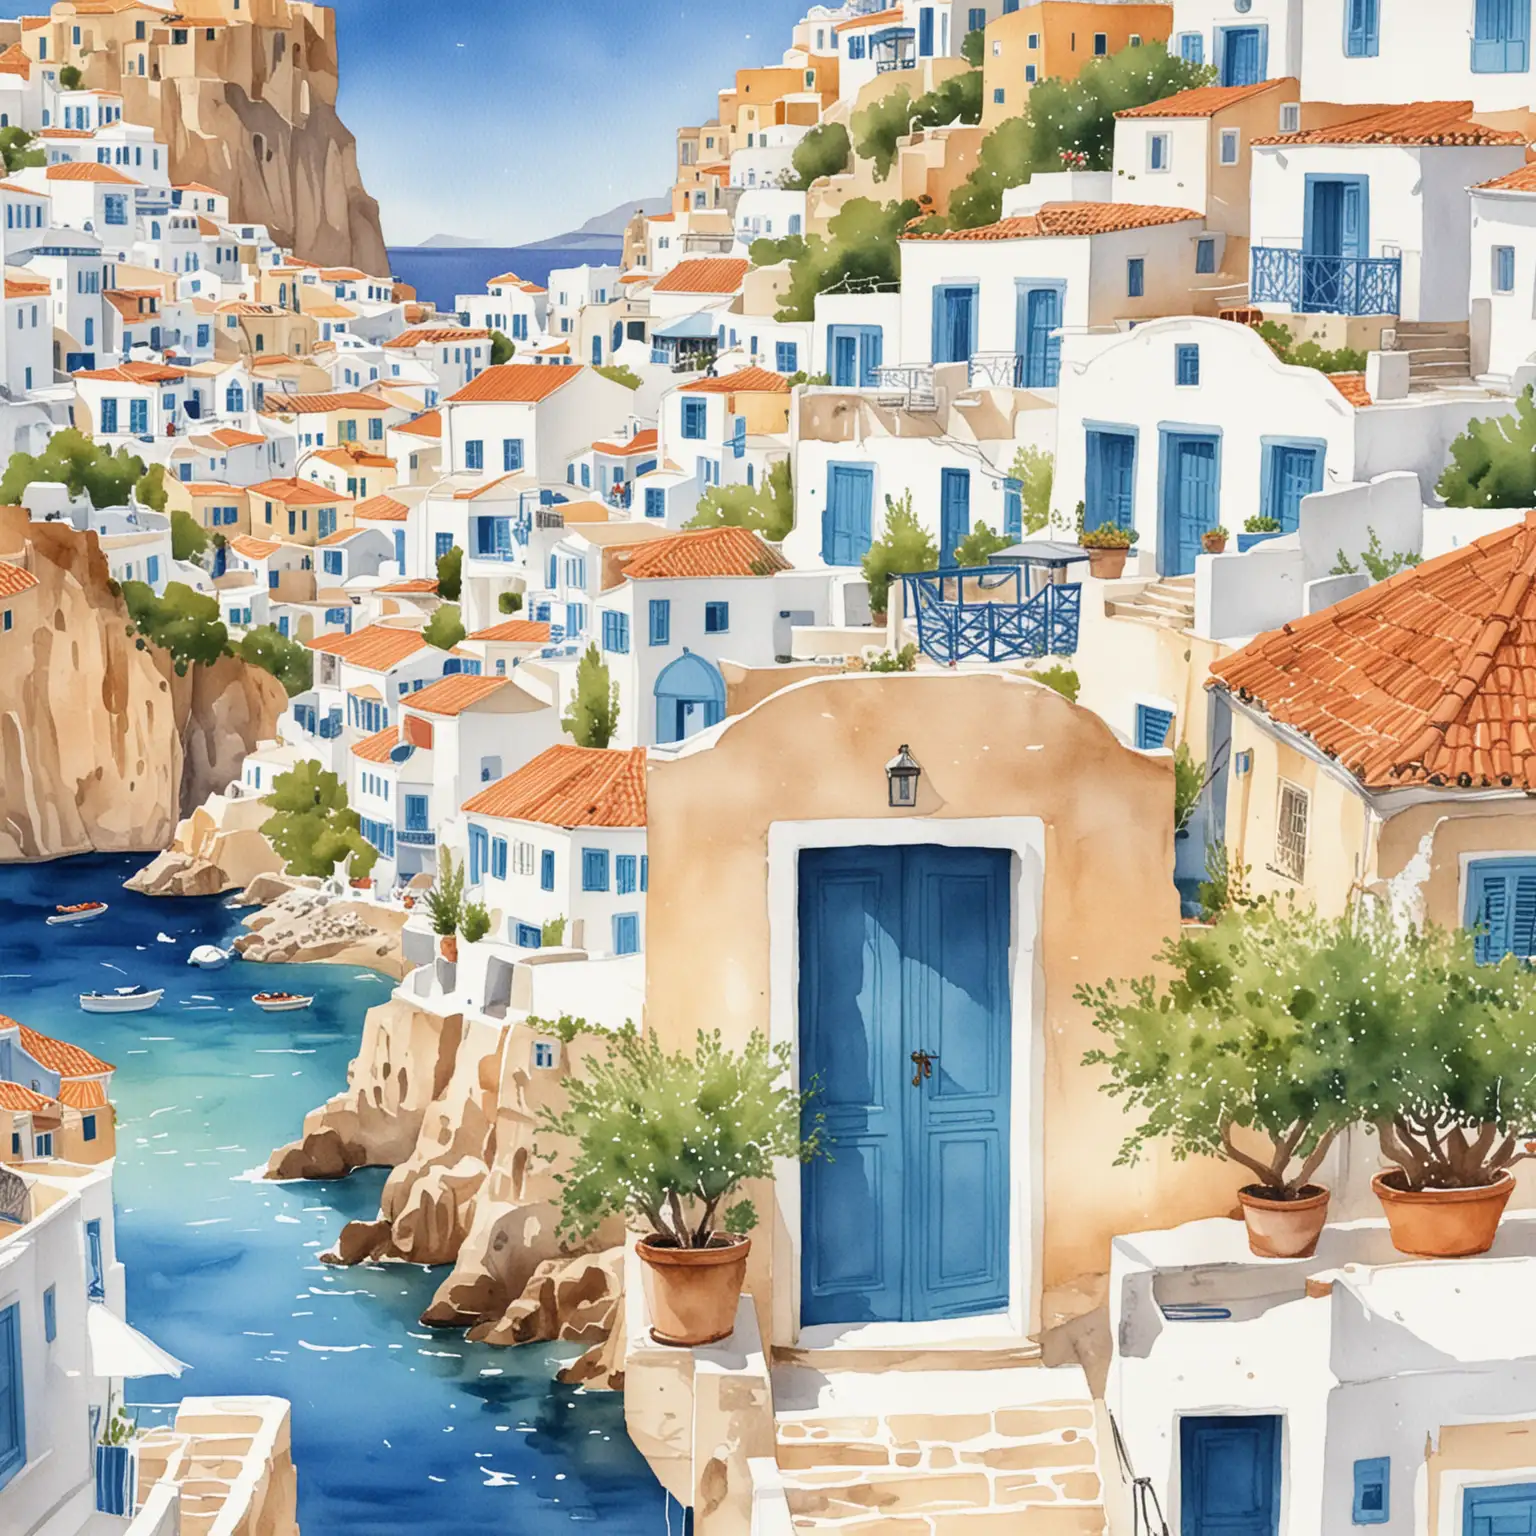 Vibrant Watercolour Illustrations of Greek Landscapes and Architecture